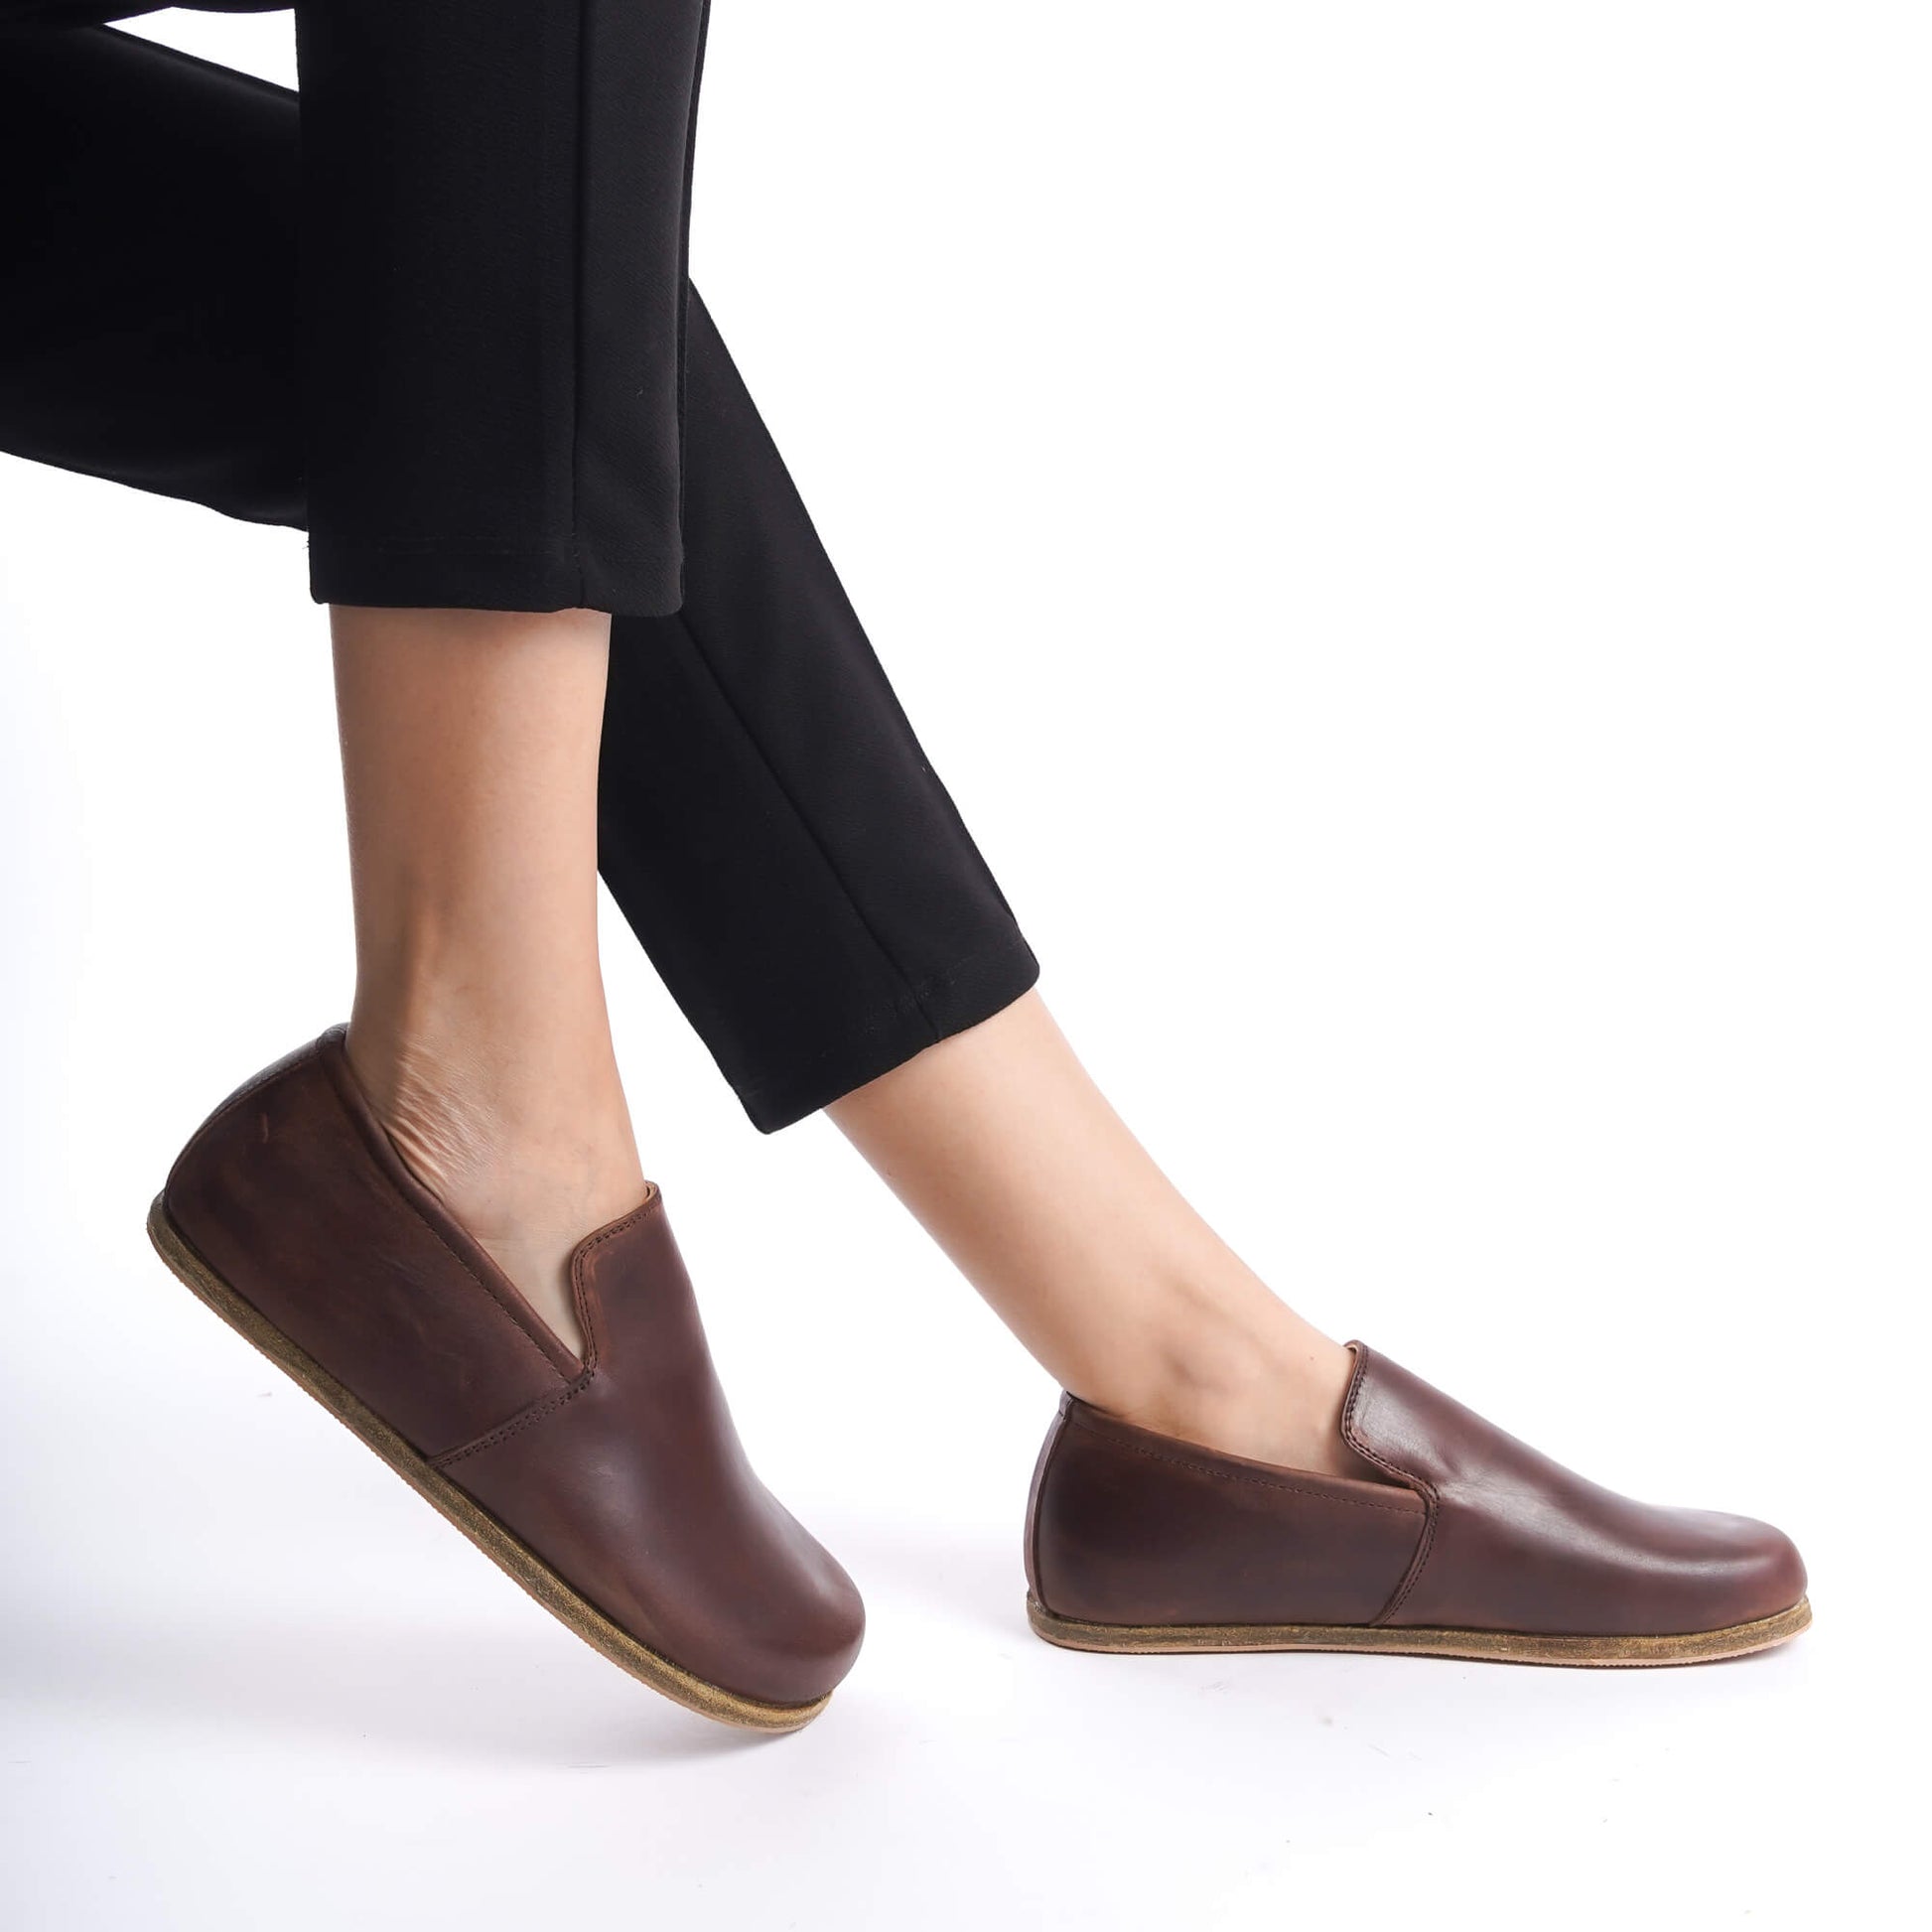 Model wearing black pants and Aeolia Brown Loafers, demonstrating the shoe's sleek design and comfortable fit in motion.